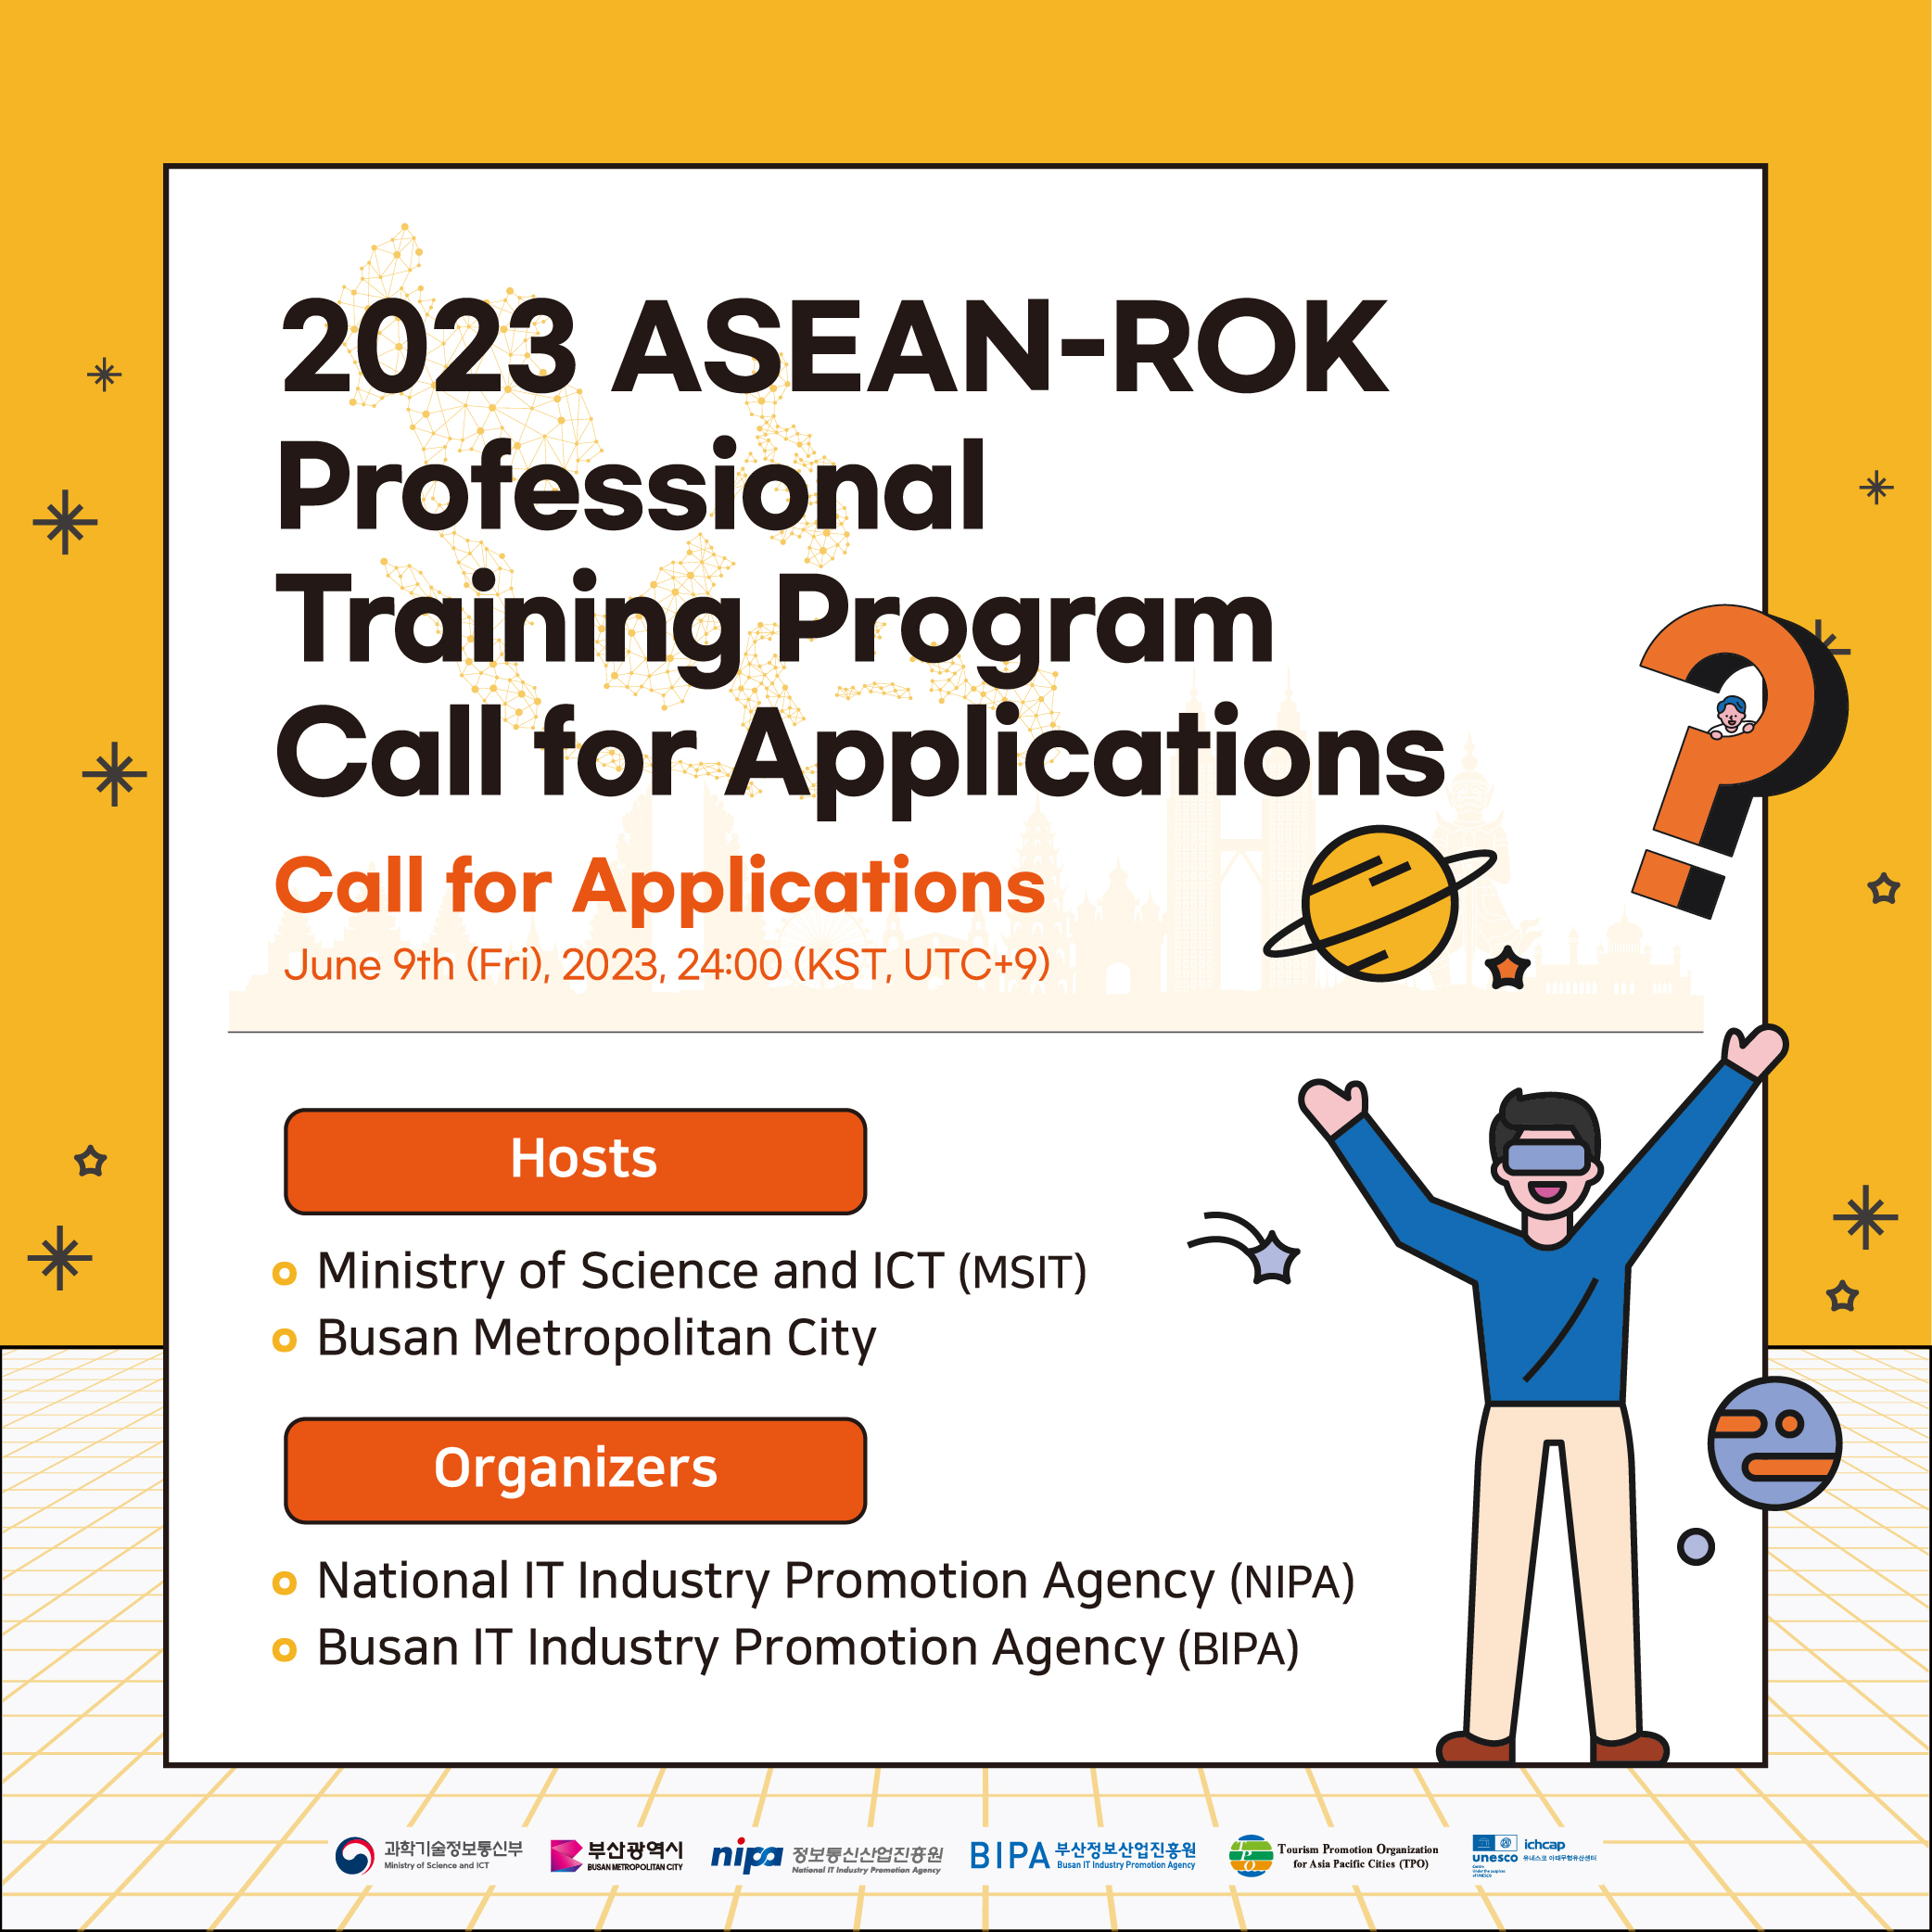 2023 ASEAN-ROK
Professional
Training Program
Call for Applications
call for Applications
June 9th(Fri), 2023, 24:00 (KST, USC+9)
Hosts
- Ministry of Science and ICT (MSIT)
- Busan Metropolitan City
Organizers
- National IT Industry Promotion Agency (NIPA)
- Busan IT Industry Promotion Agency (BIPA)